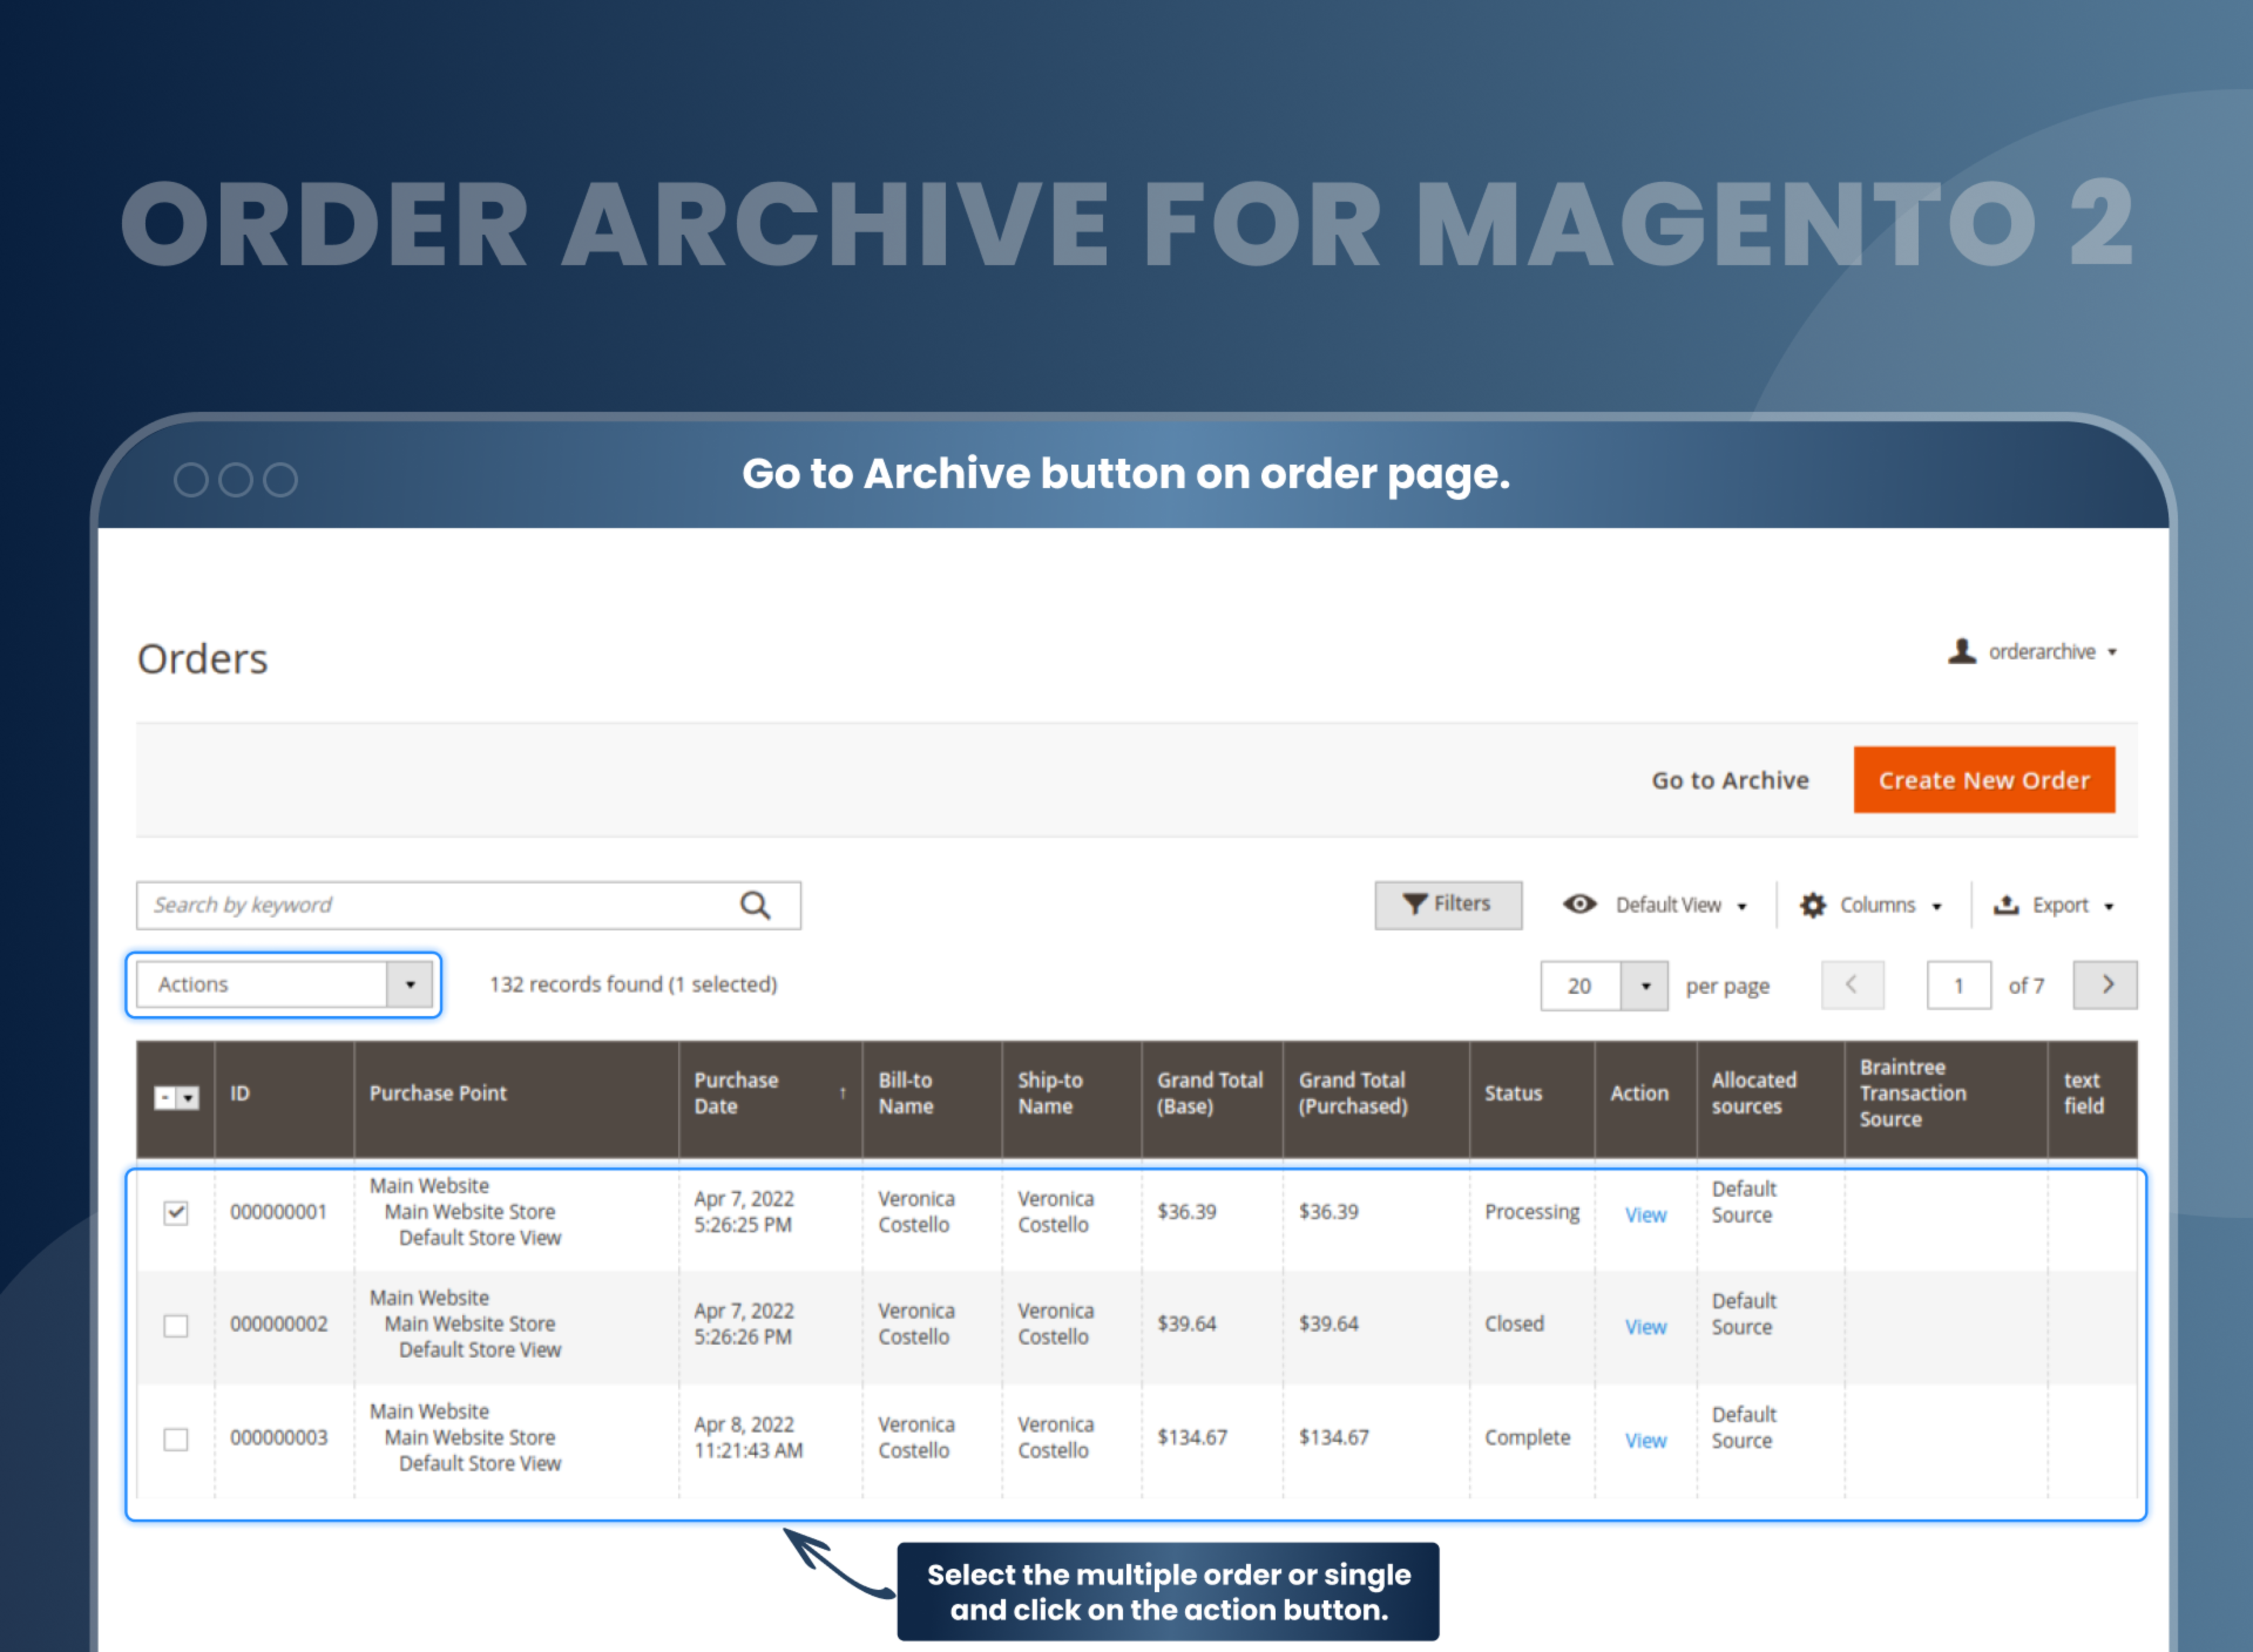 Go to Archive button on order page